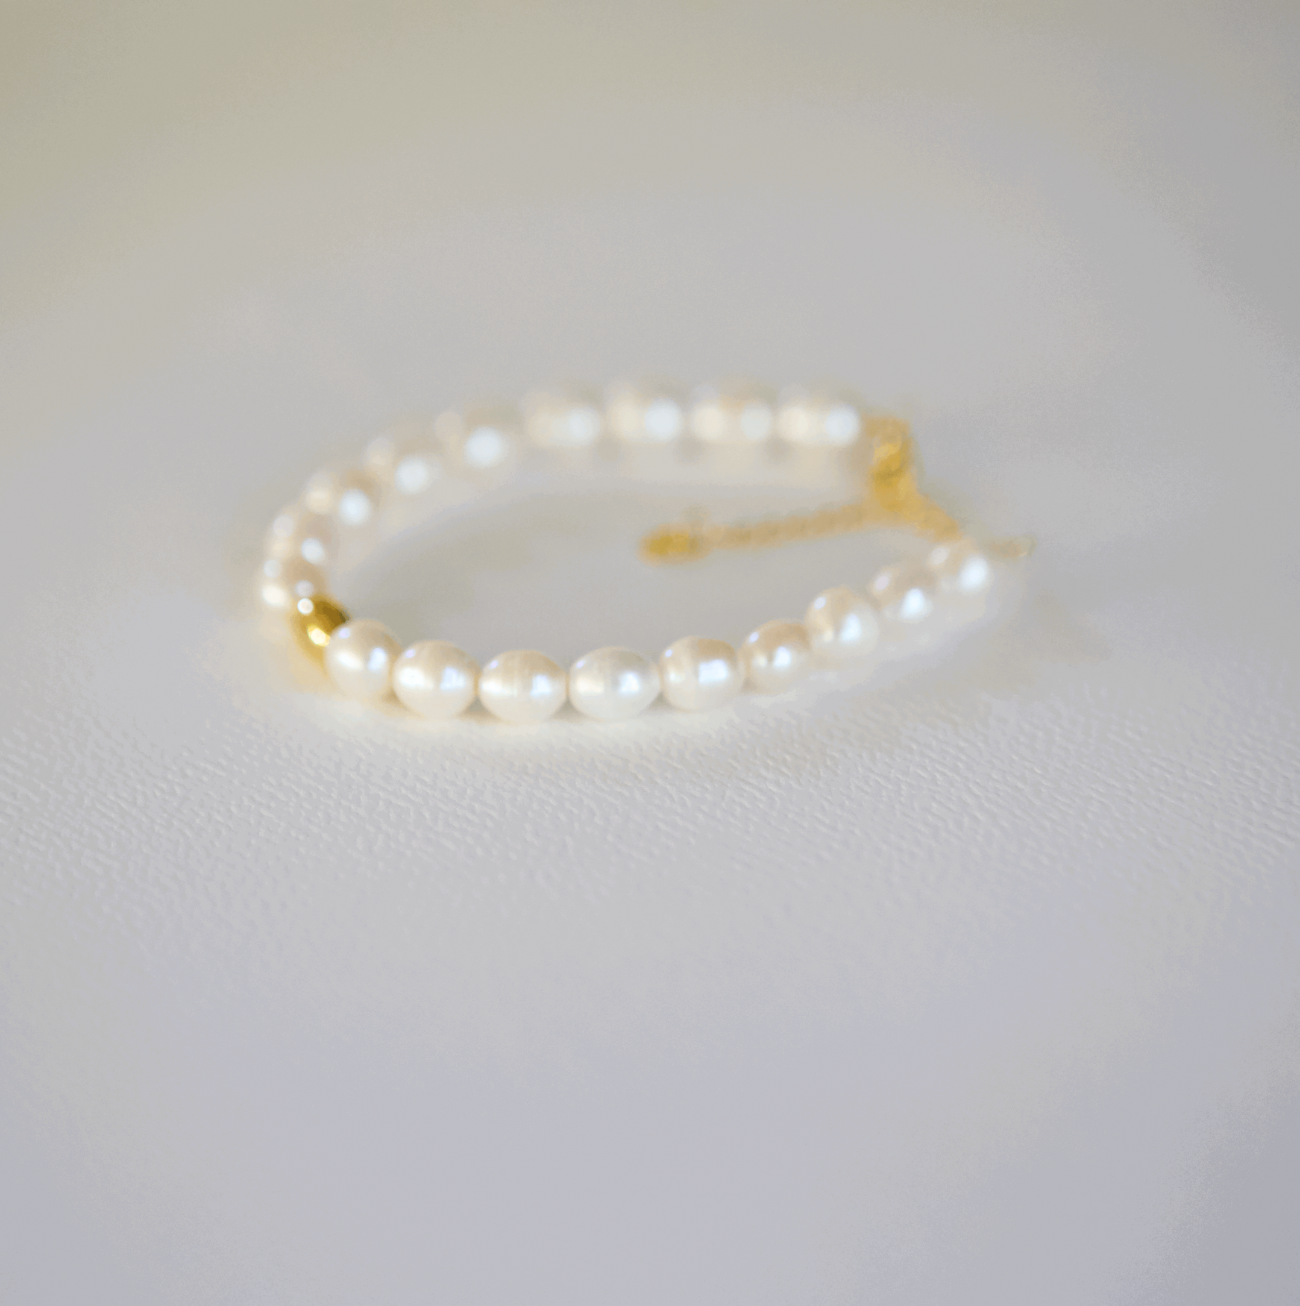 7mm freshwater pearl and 18k Gold Bead Adjustable Bracelet Creations by Kristel